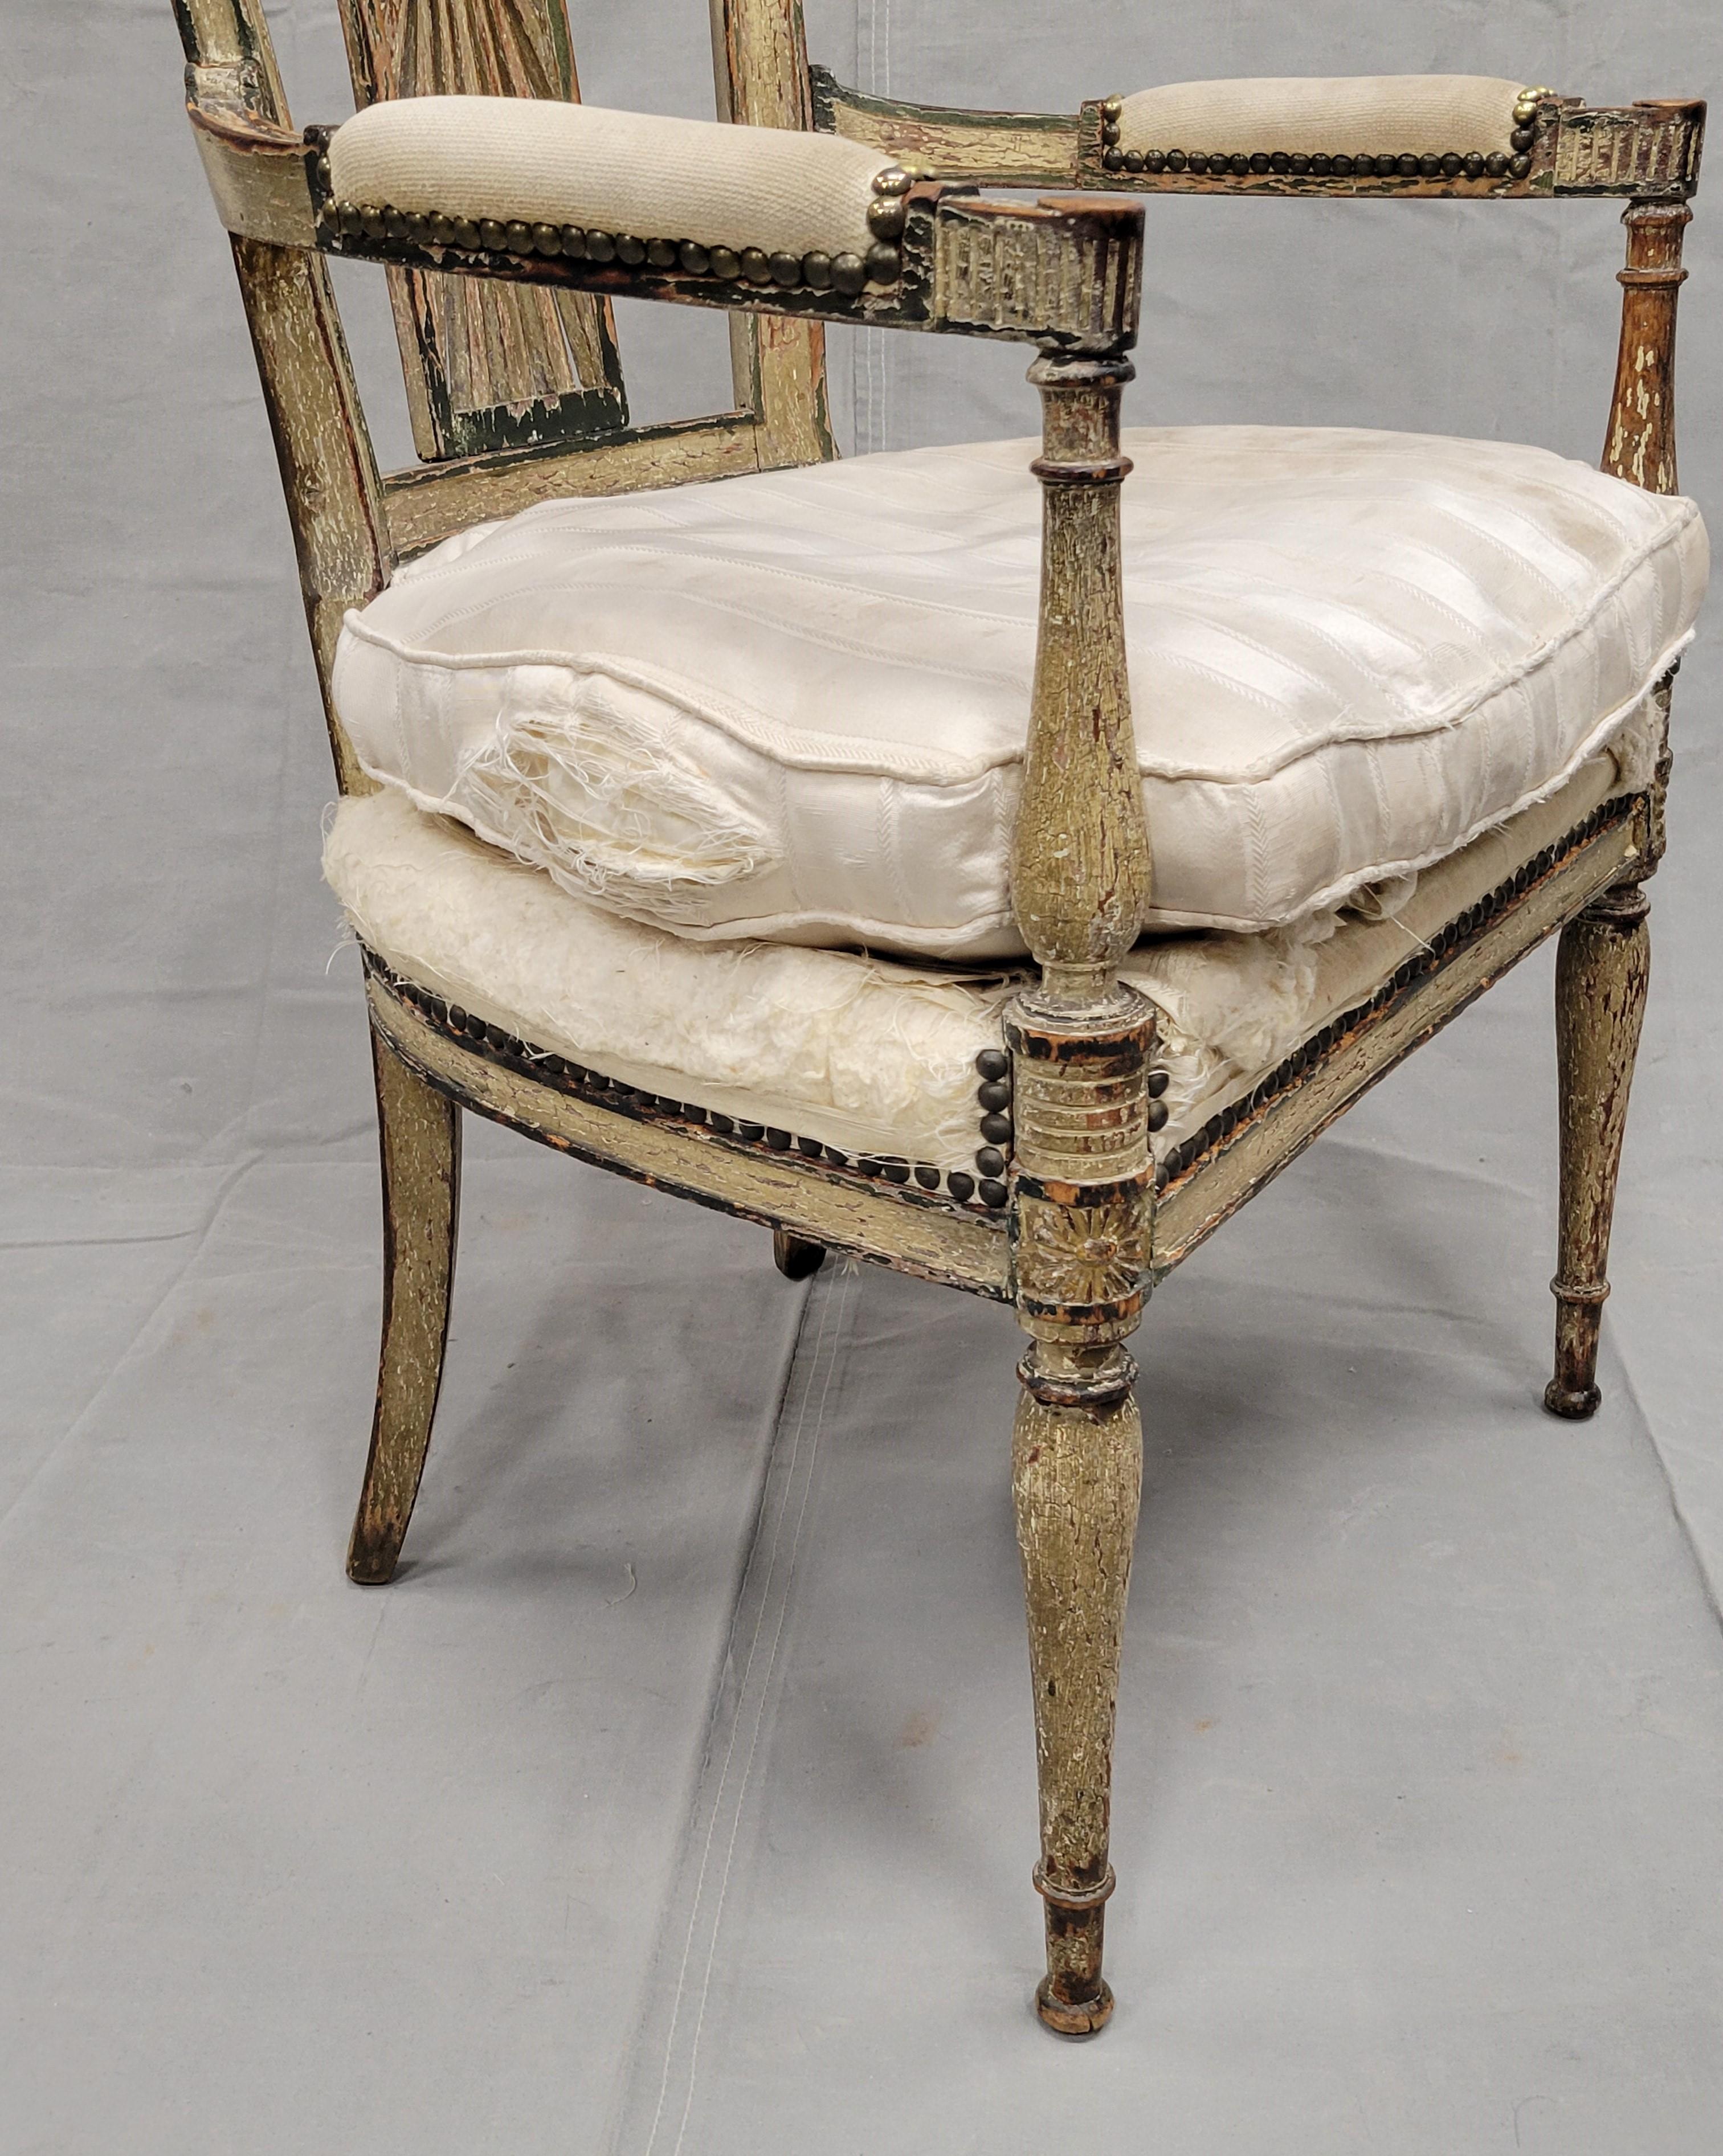 Antique Maison Jansen Style French Louis XVI Painted Fauteuil Chairs - a Pair For Sale 7